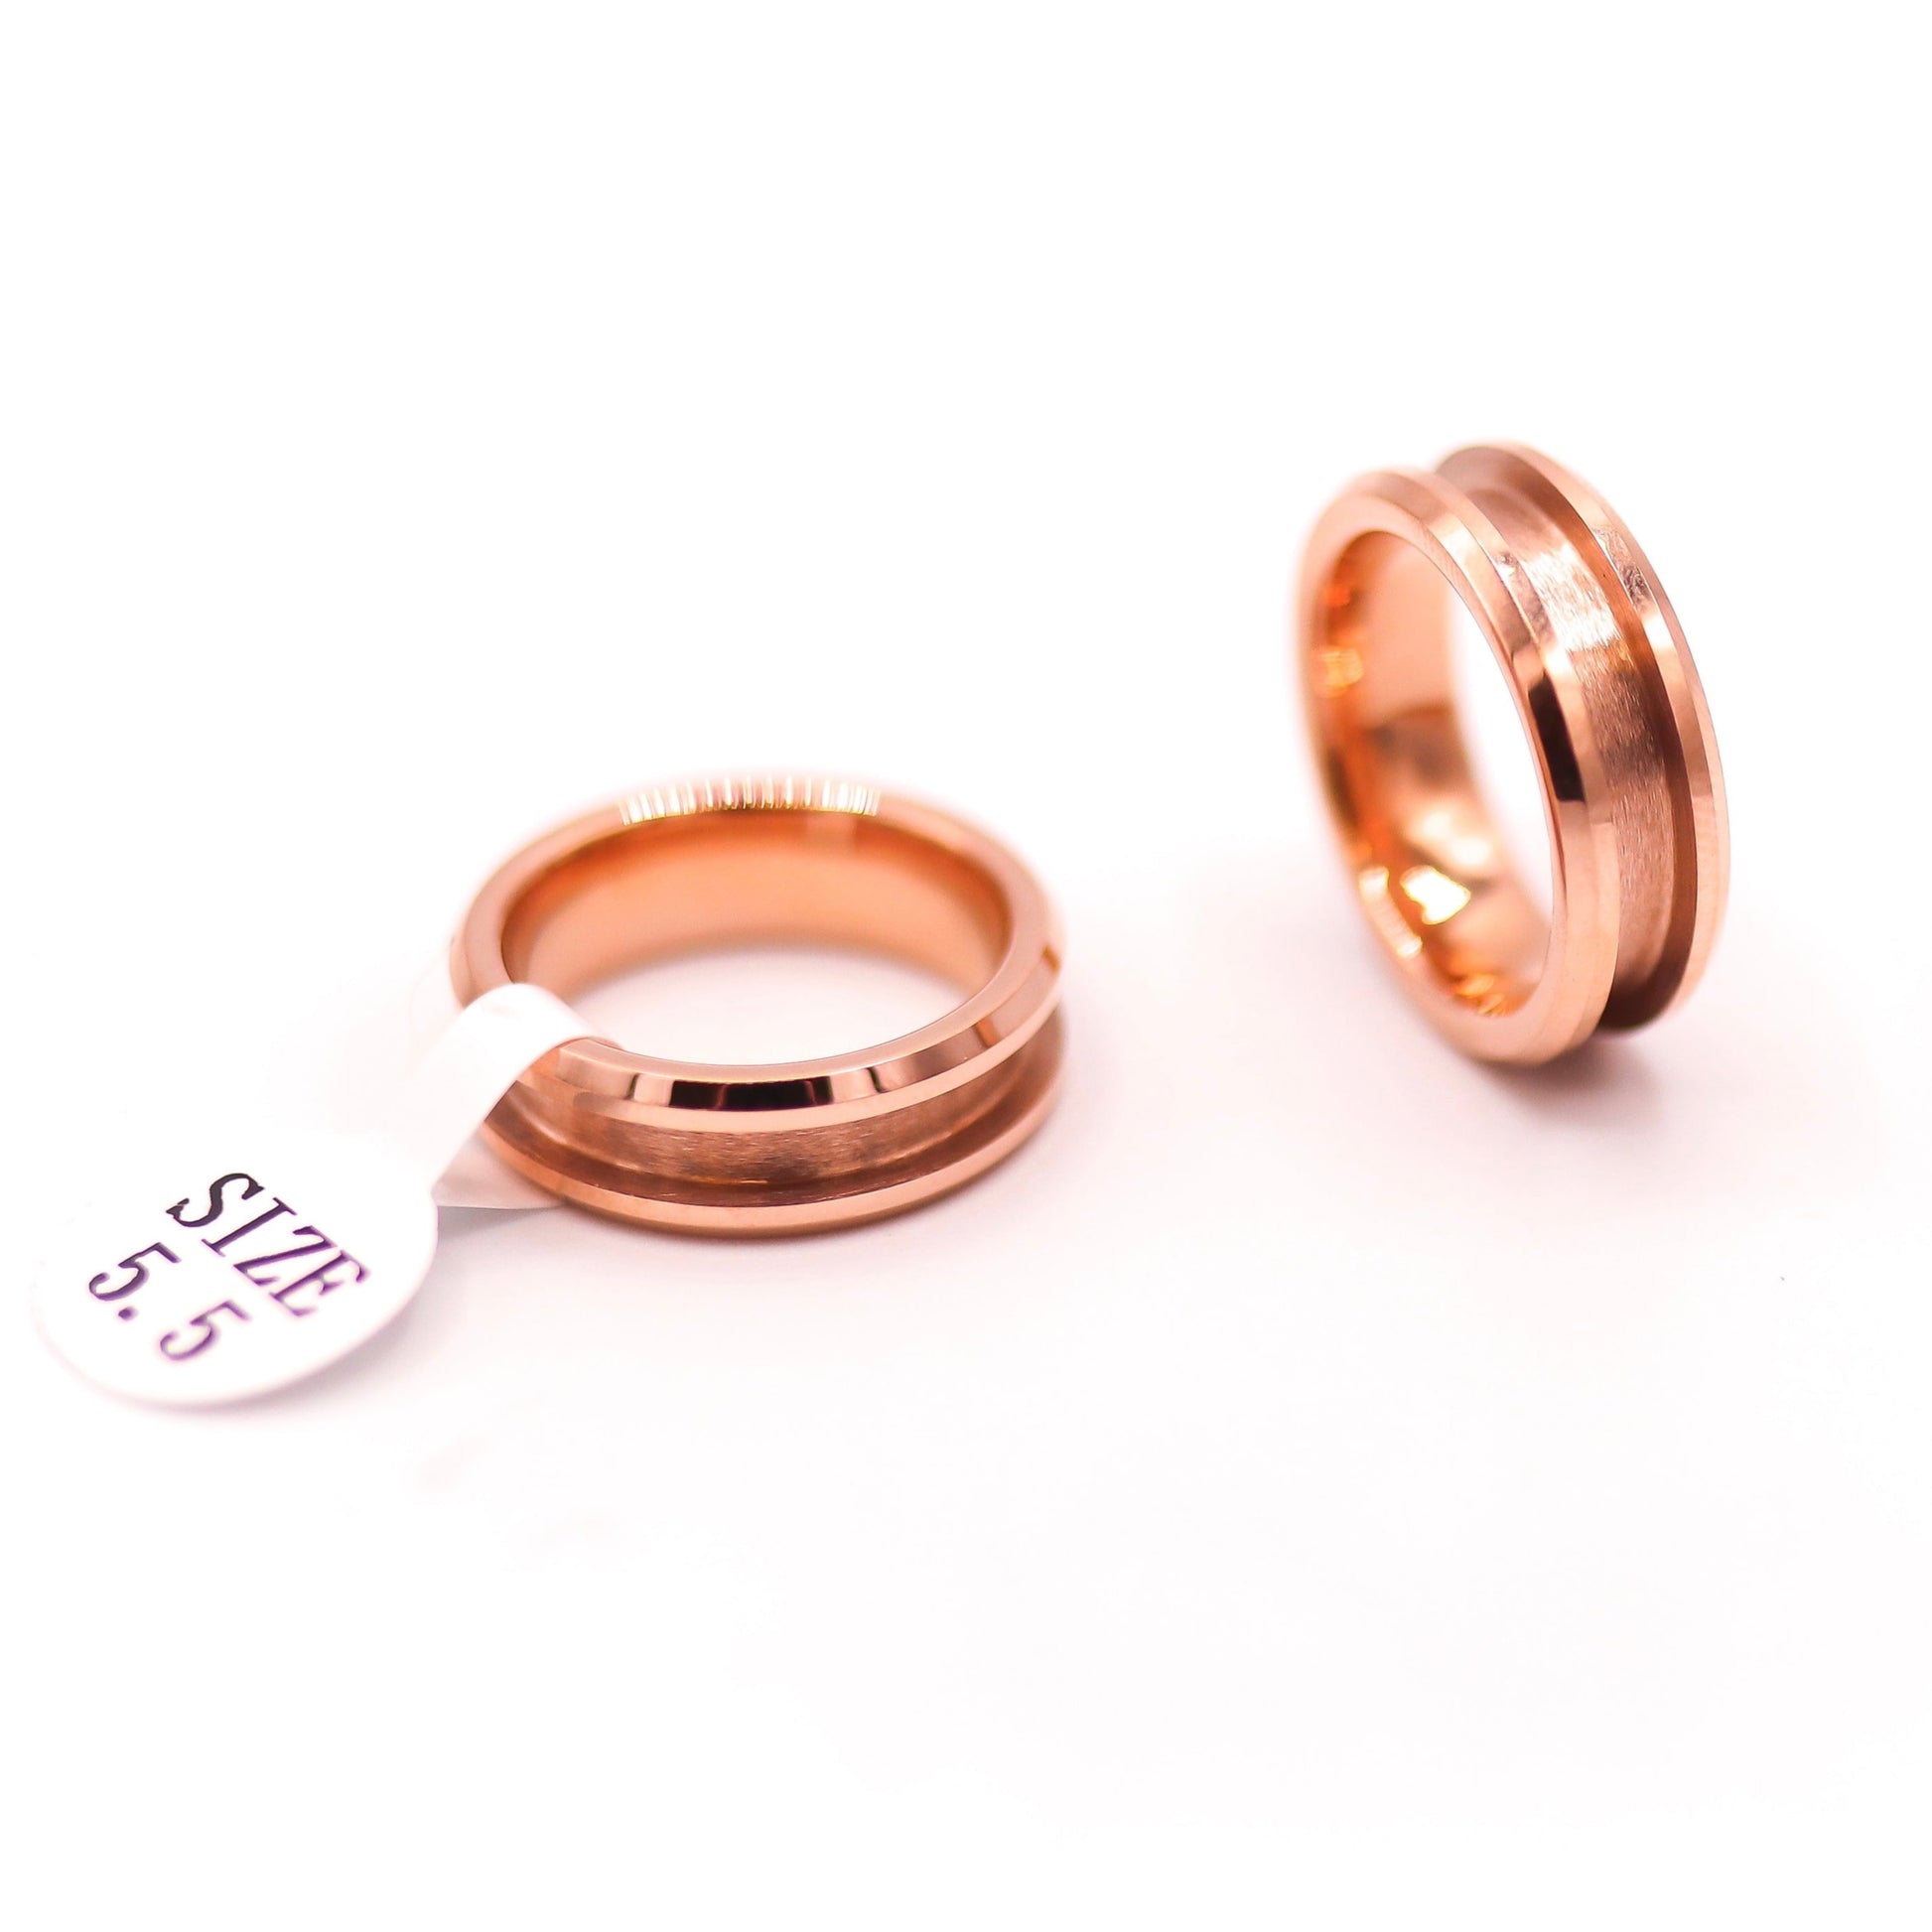 Rose Gold-Plated Tungsten Ring Blank - Patrick Adair Supplies